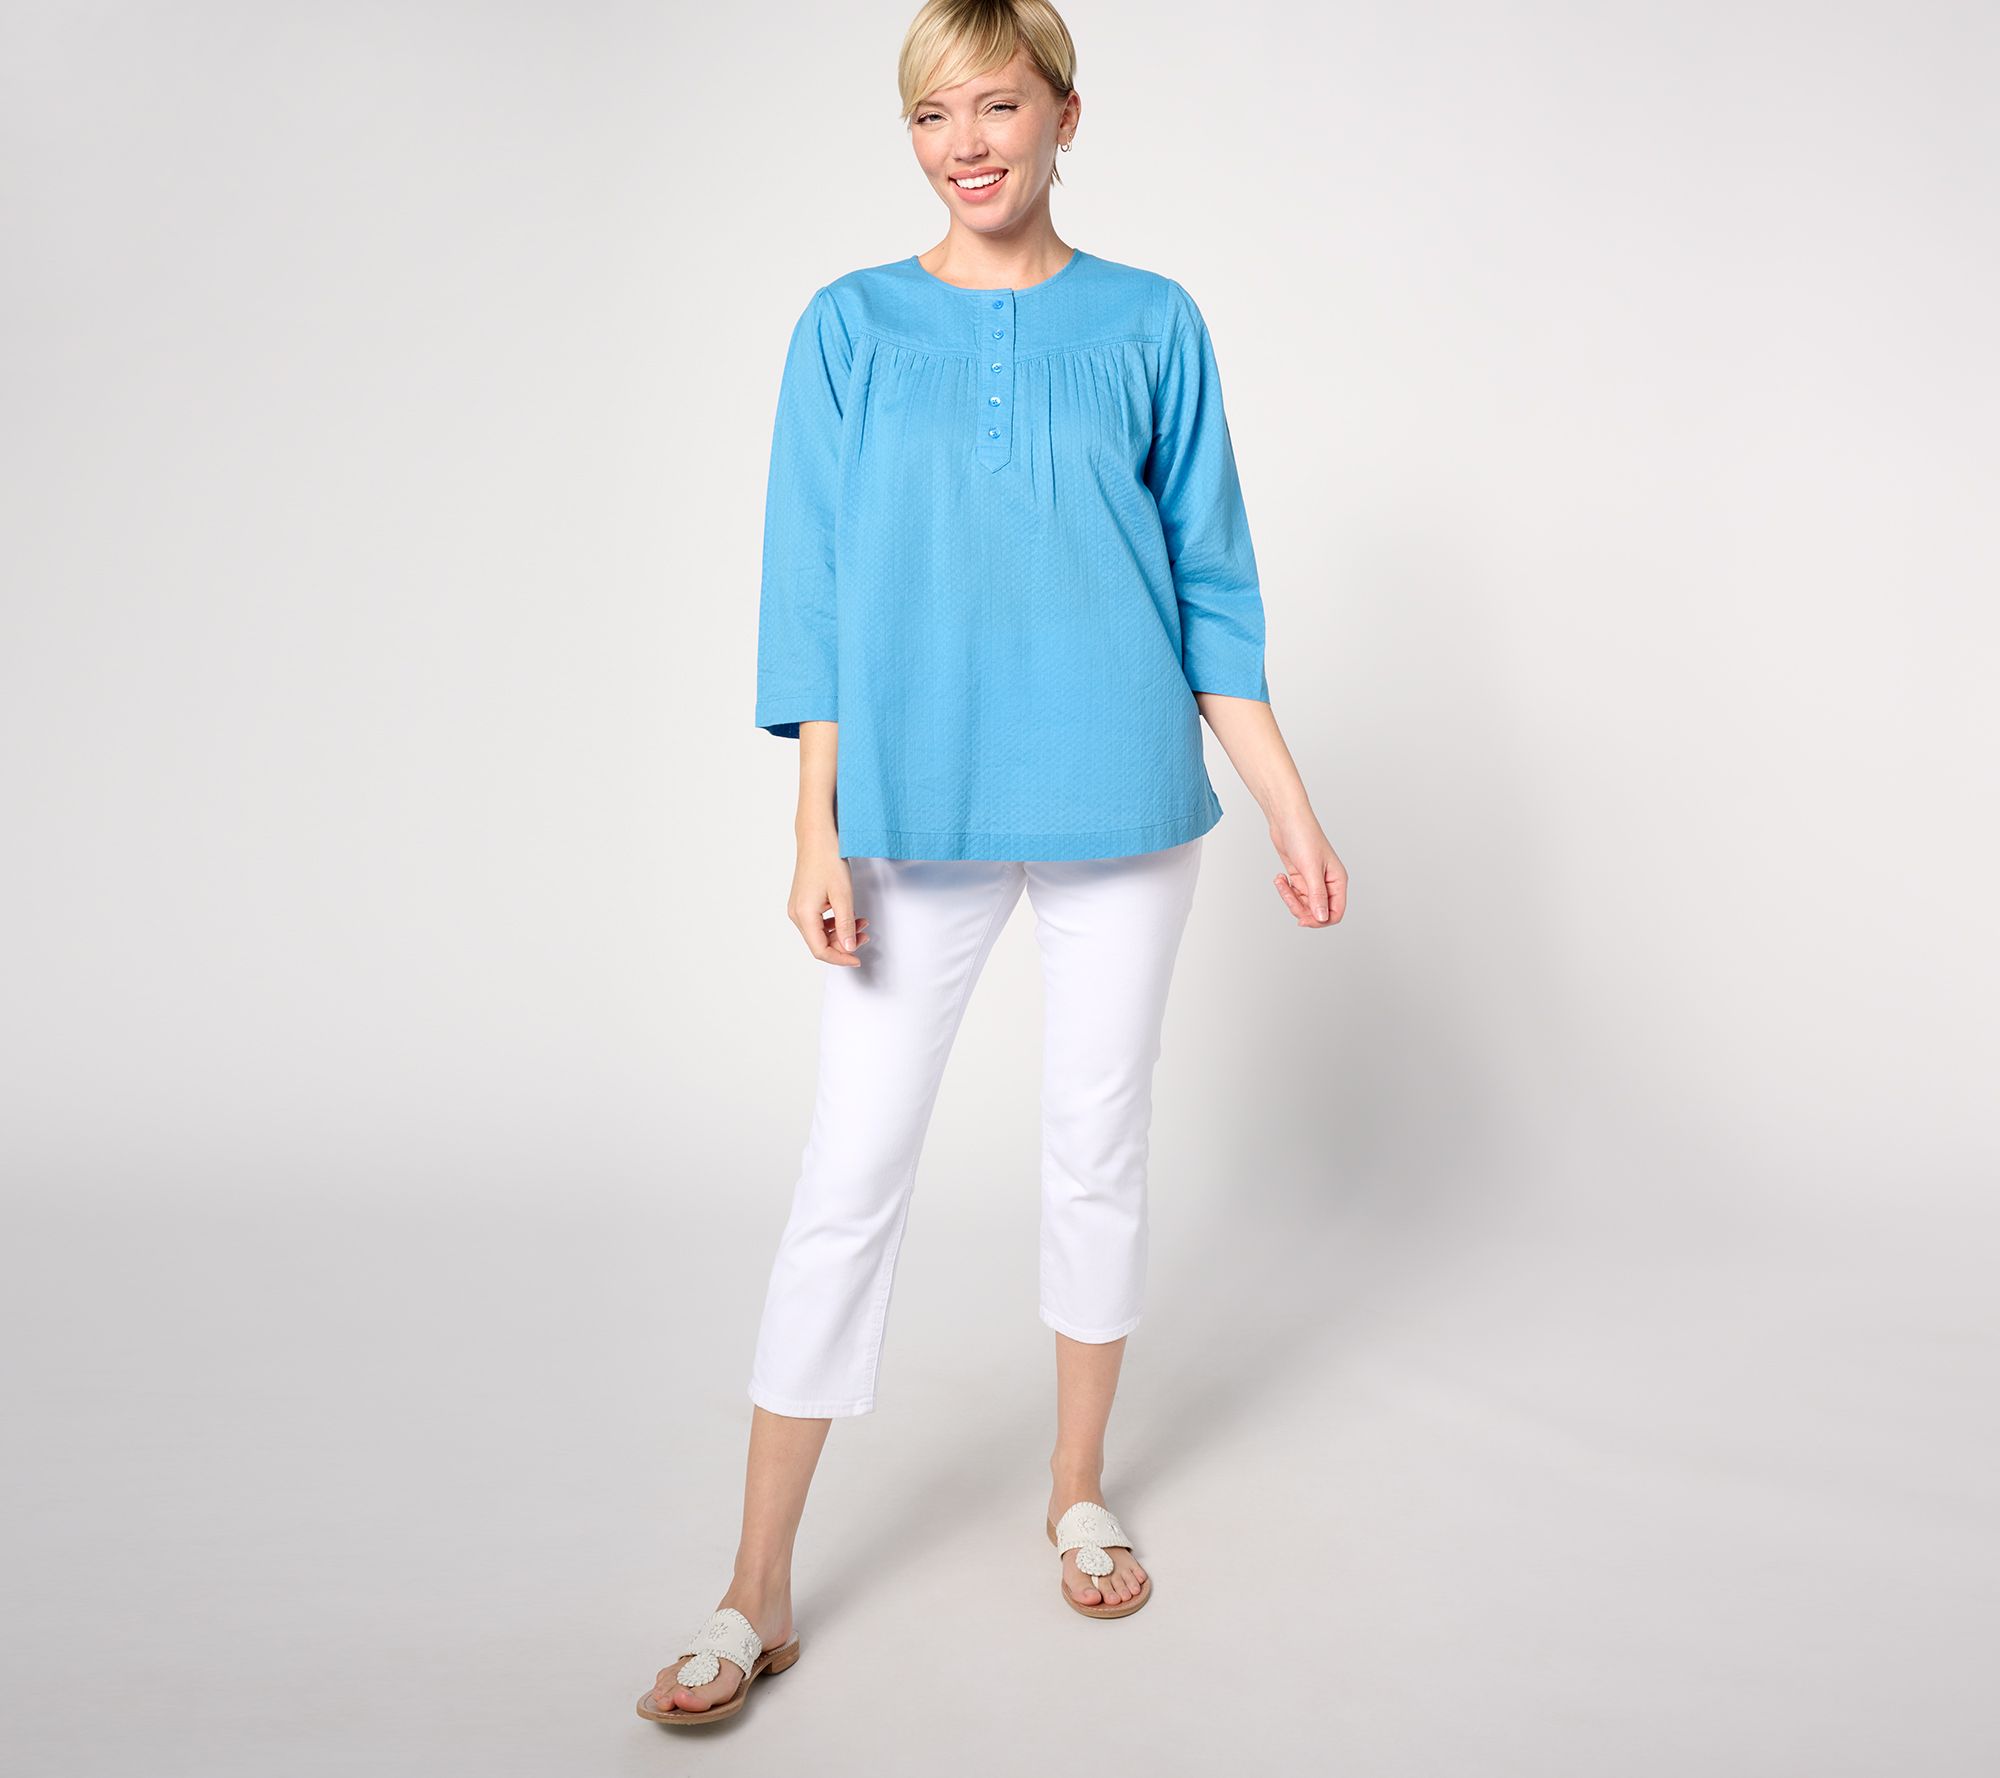 LOGO by Lori Goldstein Textured Woven Peasant Top - QVC.com